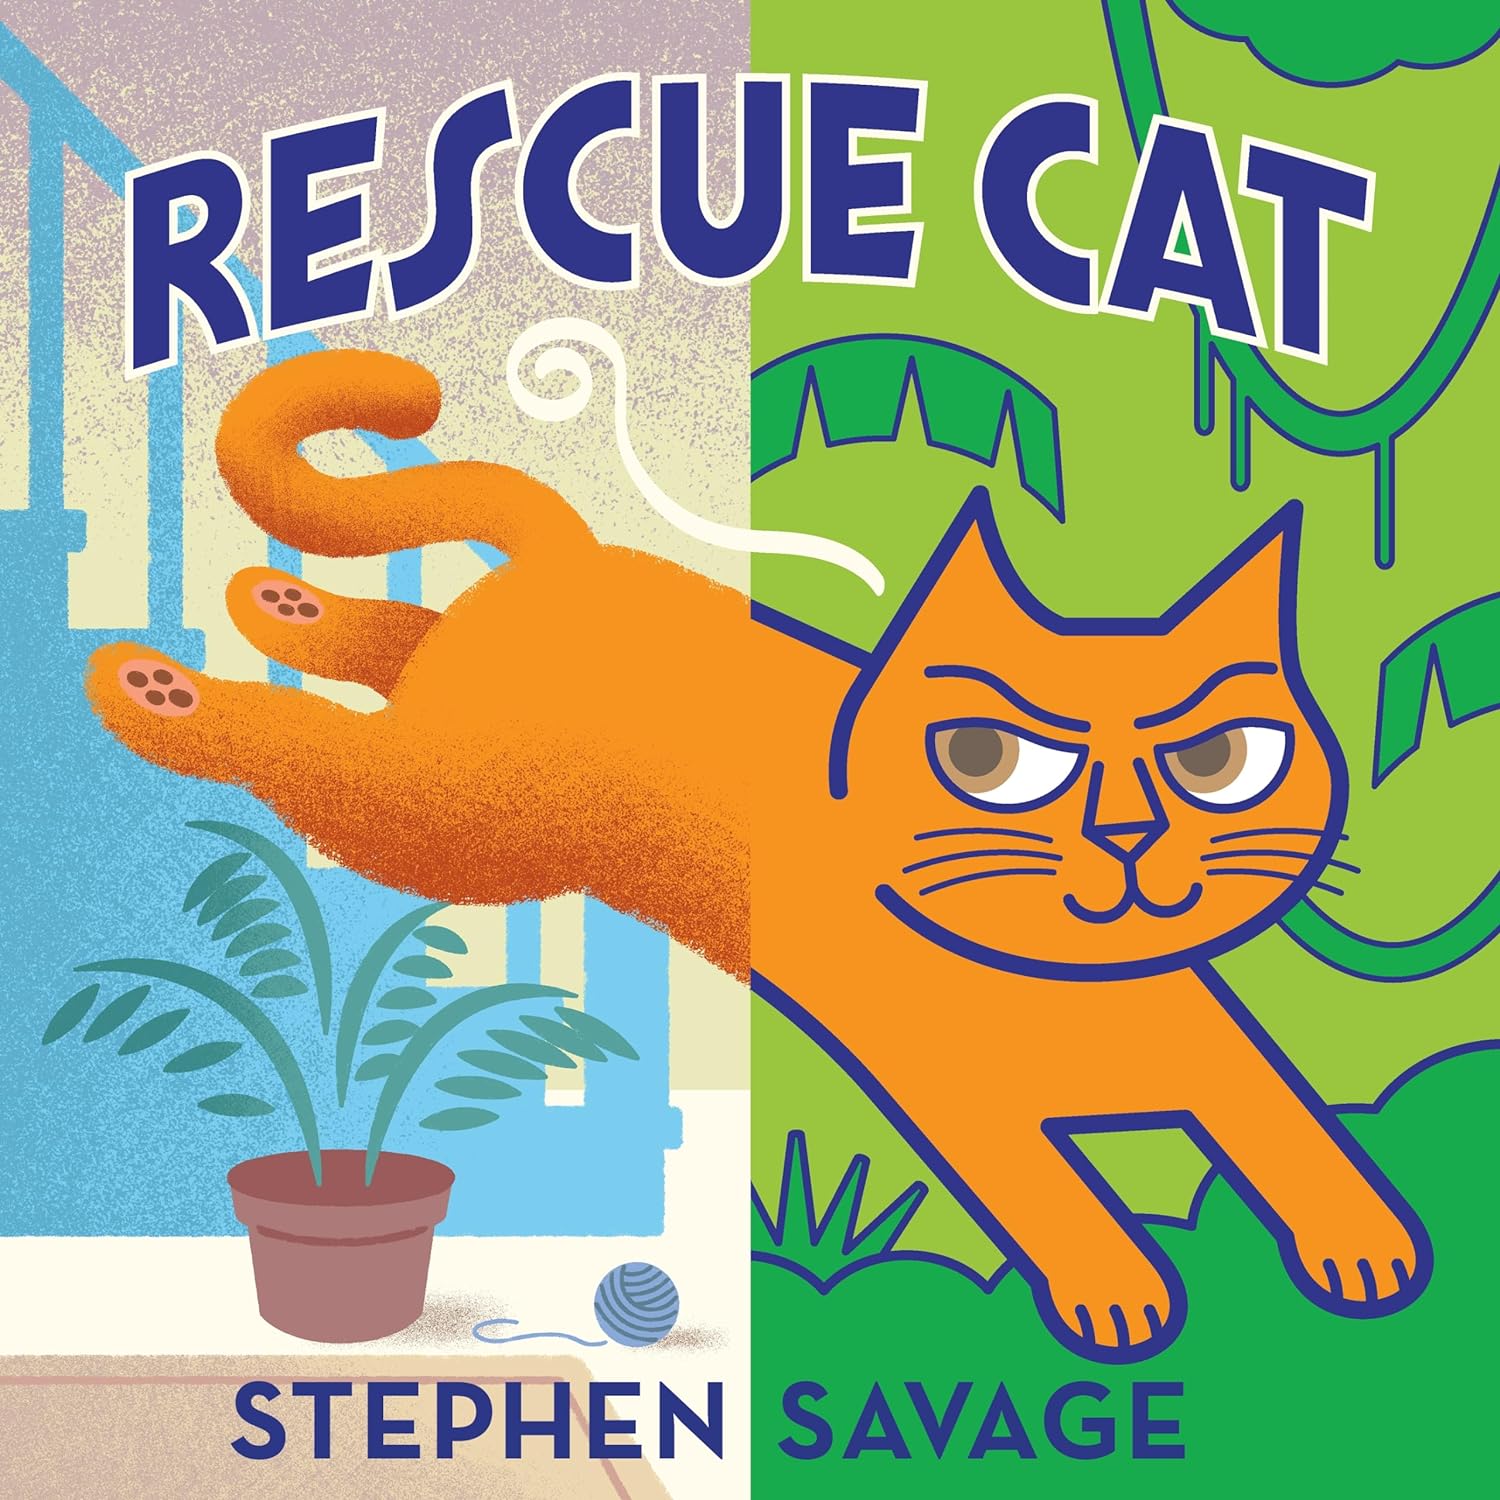 Image for "Rescue Cat"